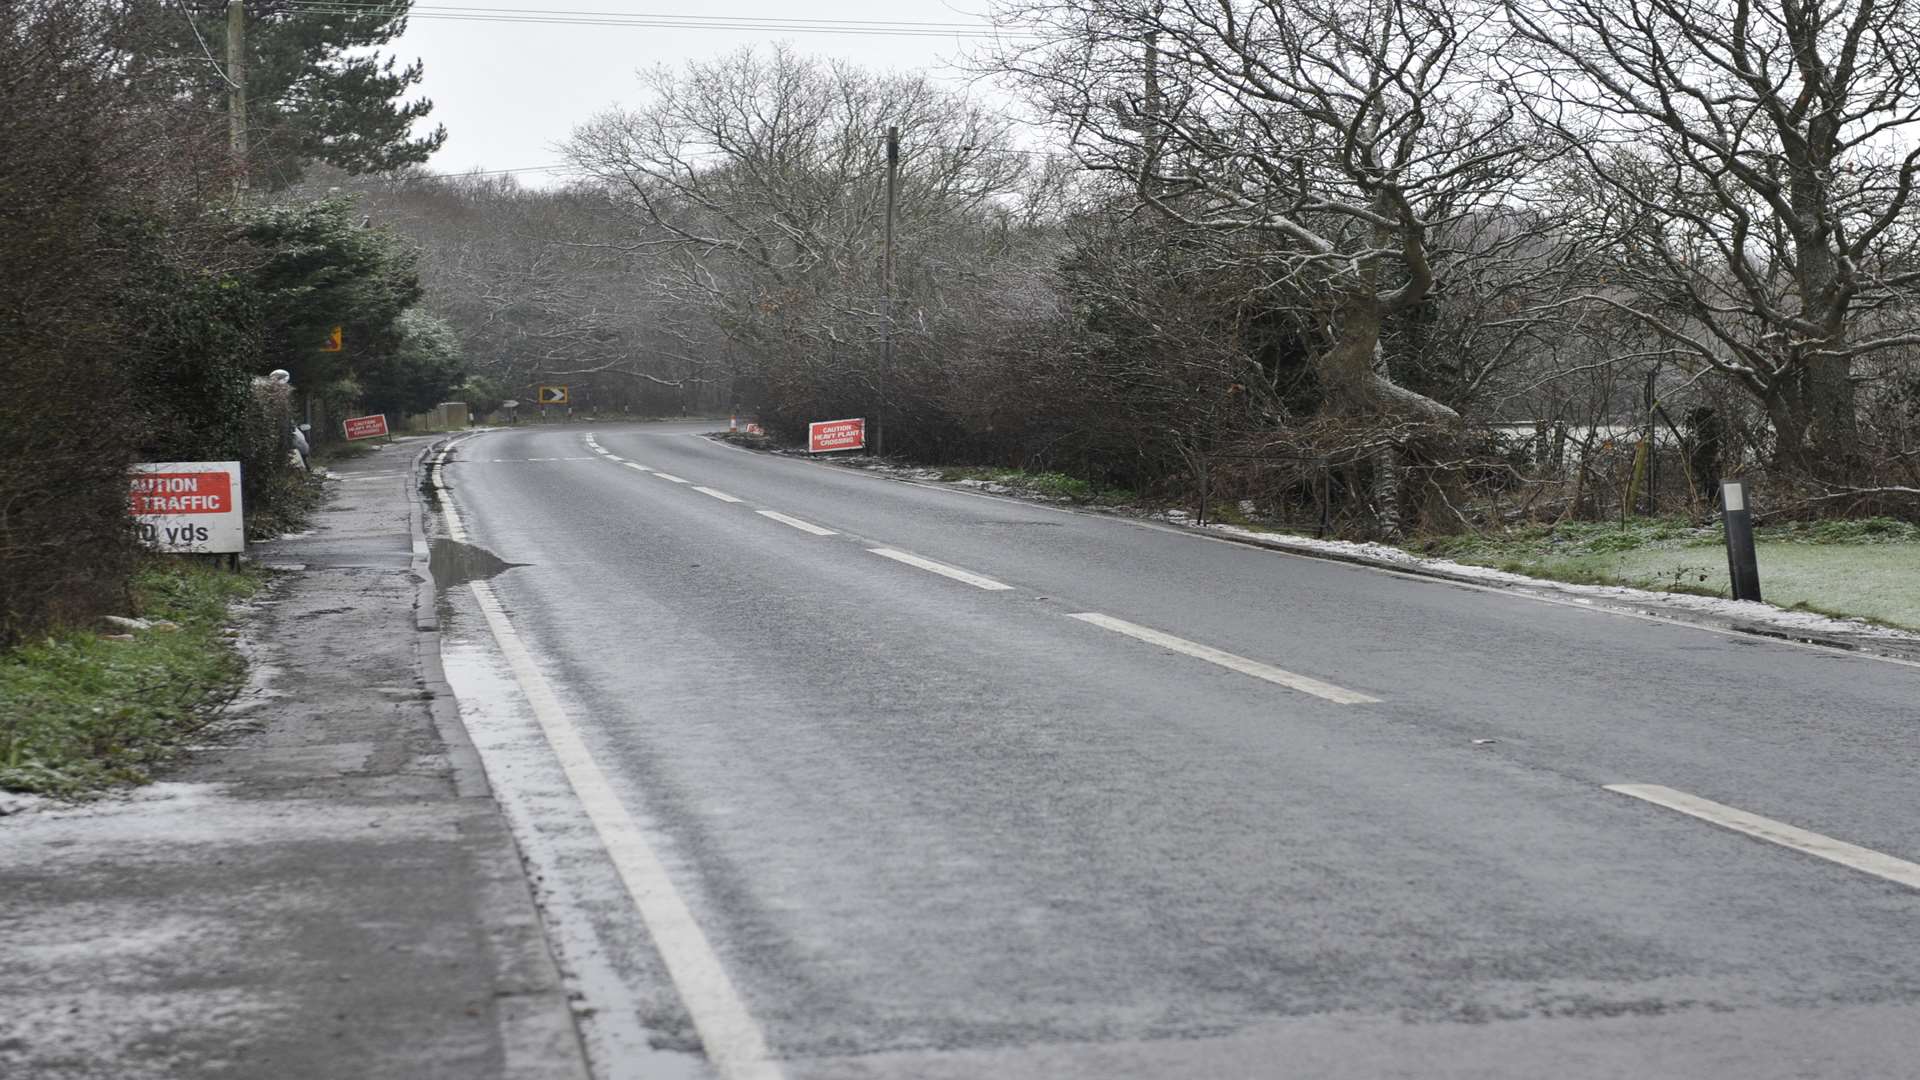 The accident site on the A291 near Calcott Hill